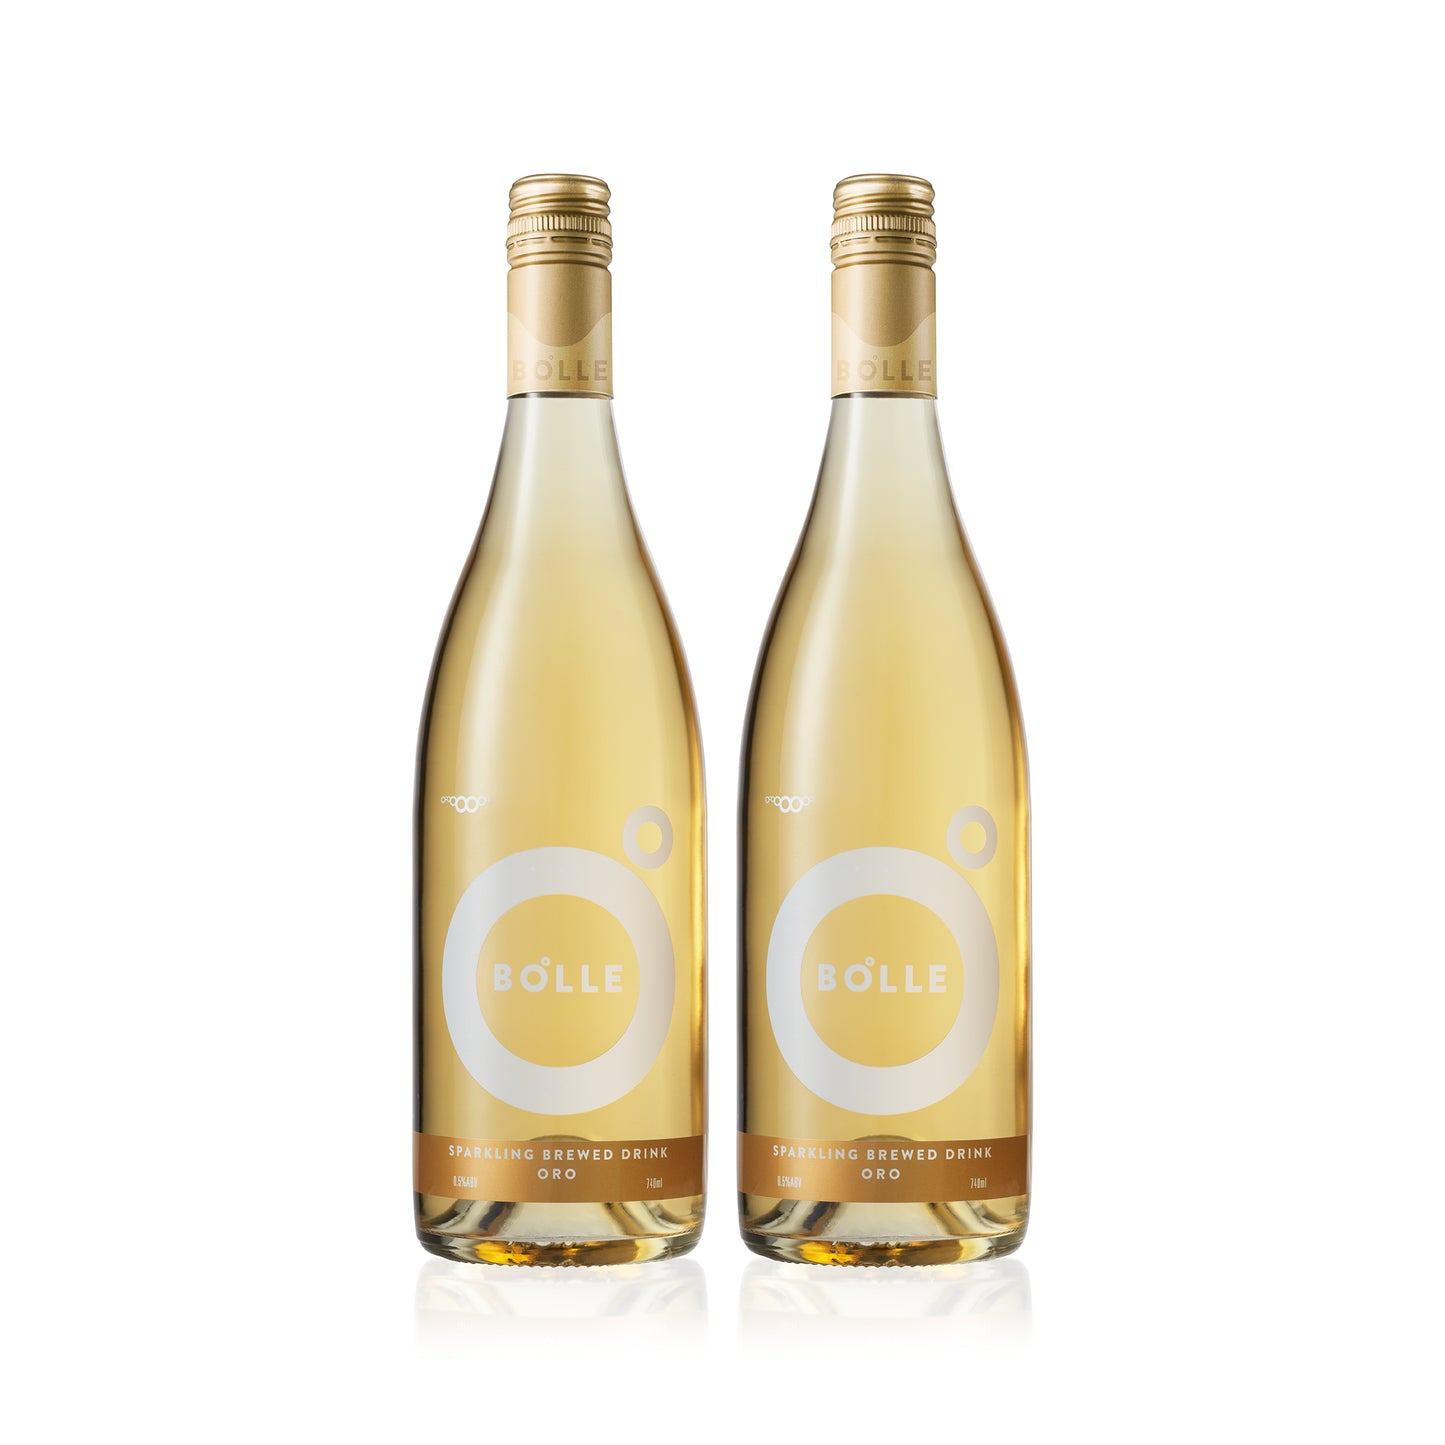 Bolle ORO alcohol-free sparkling wine